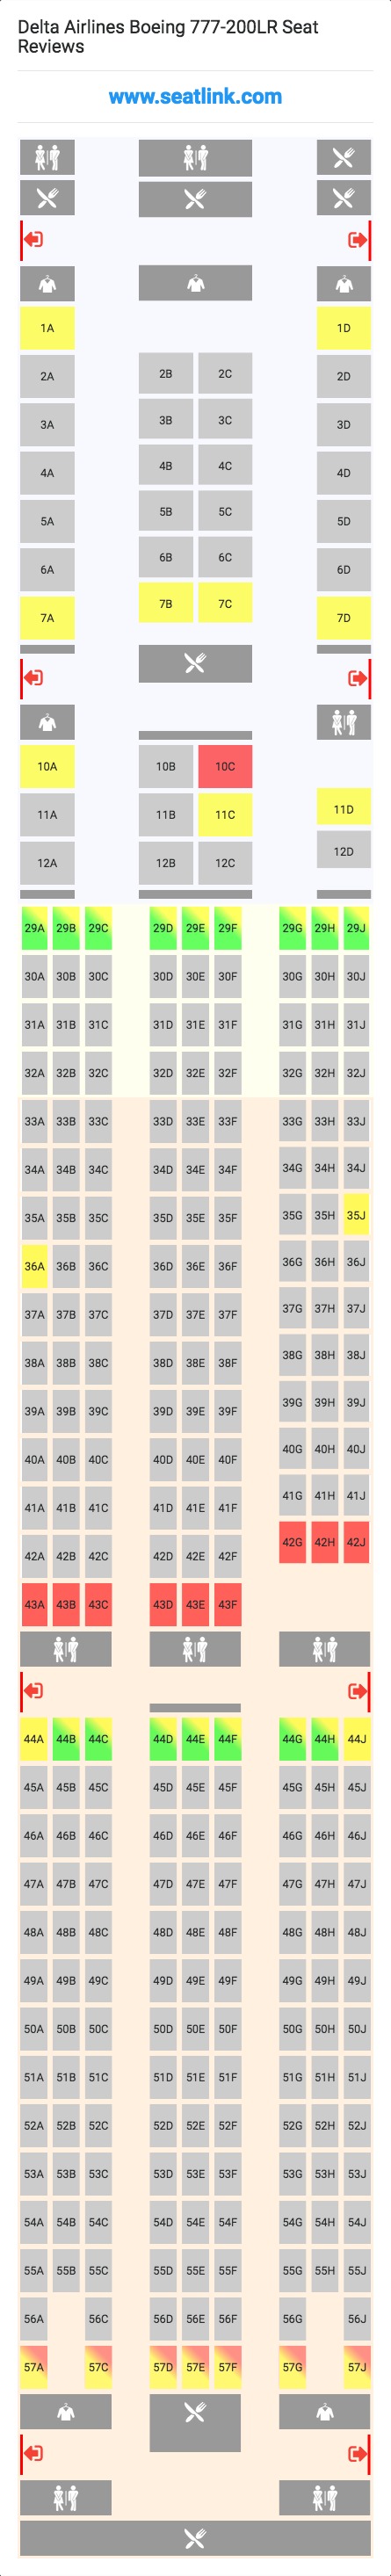 Delta Airlines Boeing 777-200LR (77L) Seat Map